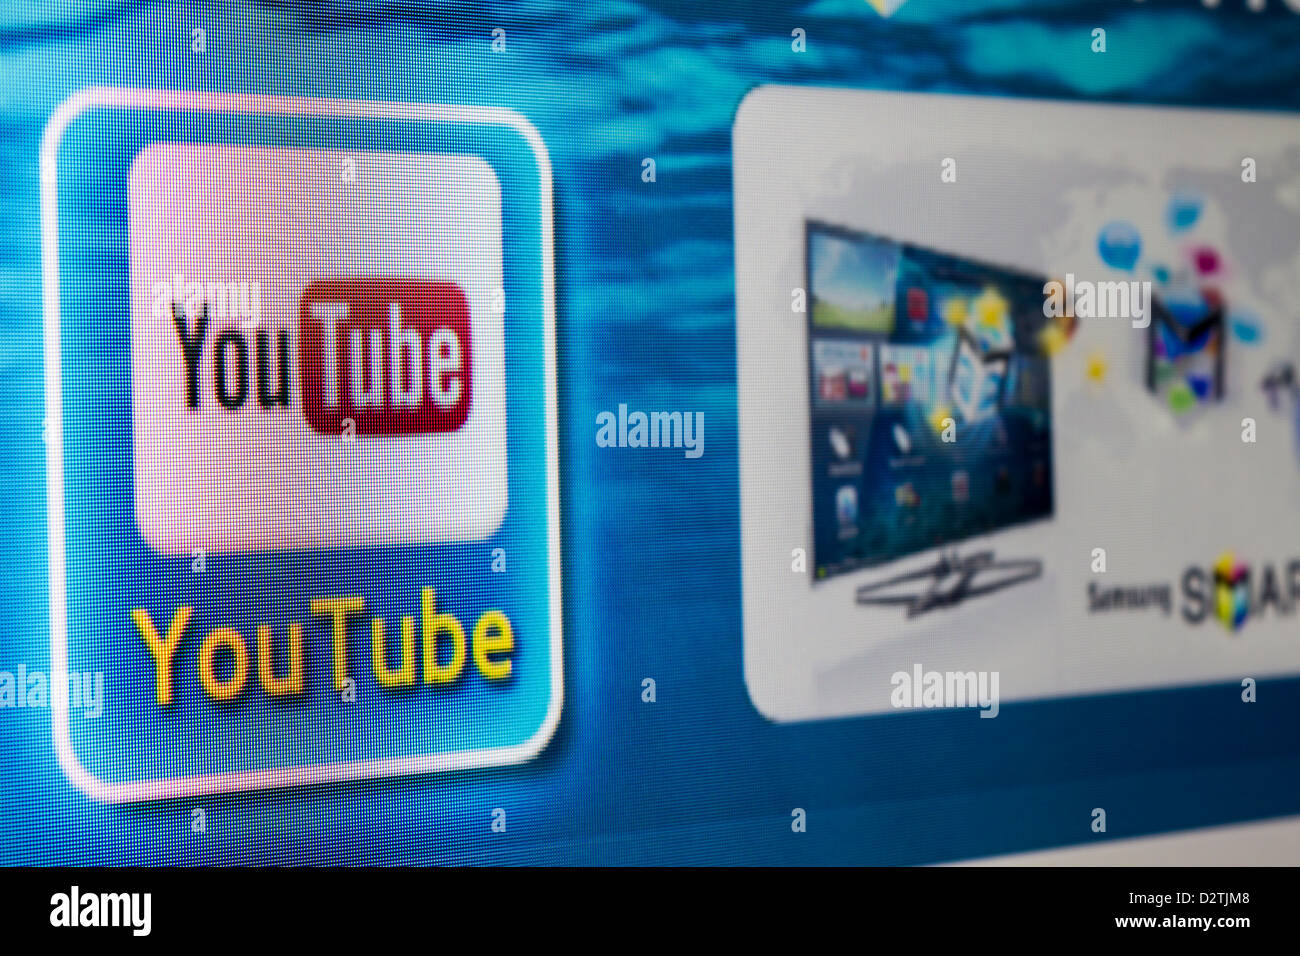 YouTube app icon on a Tv screen. YouTube is the World's most acknowledged video sharing site, established in 2005. Stock Photo